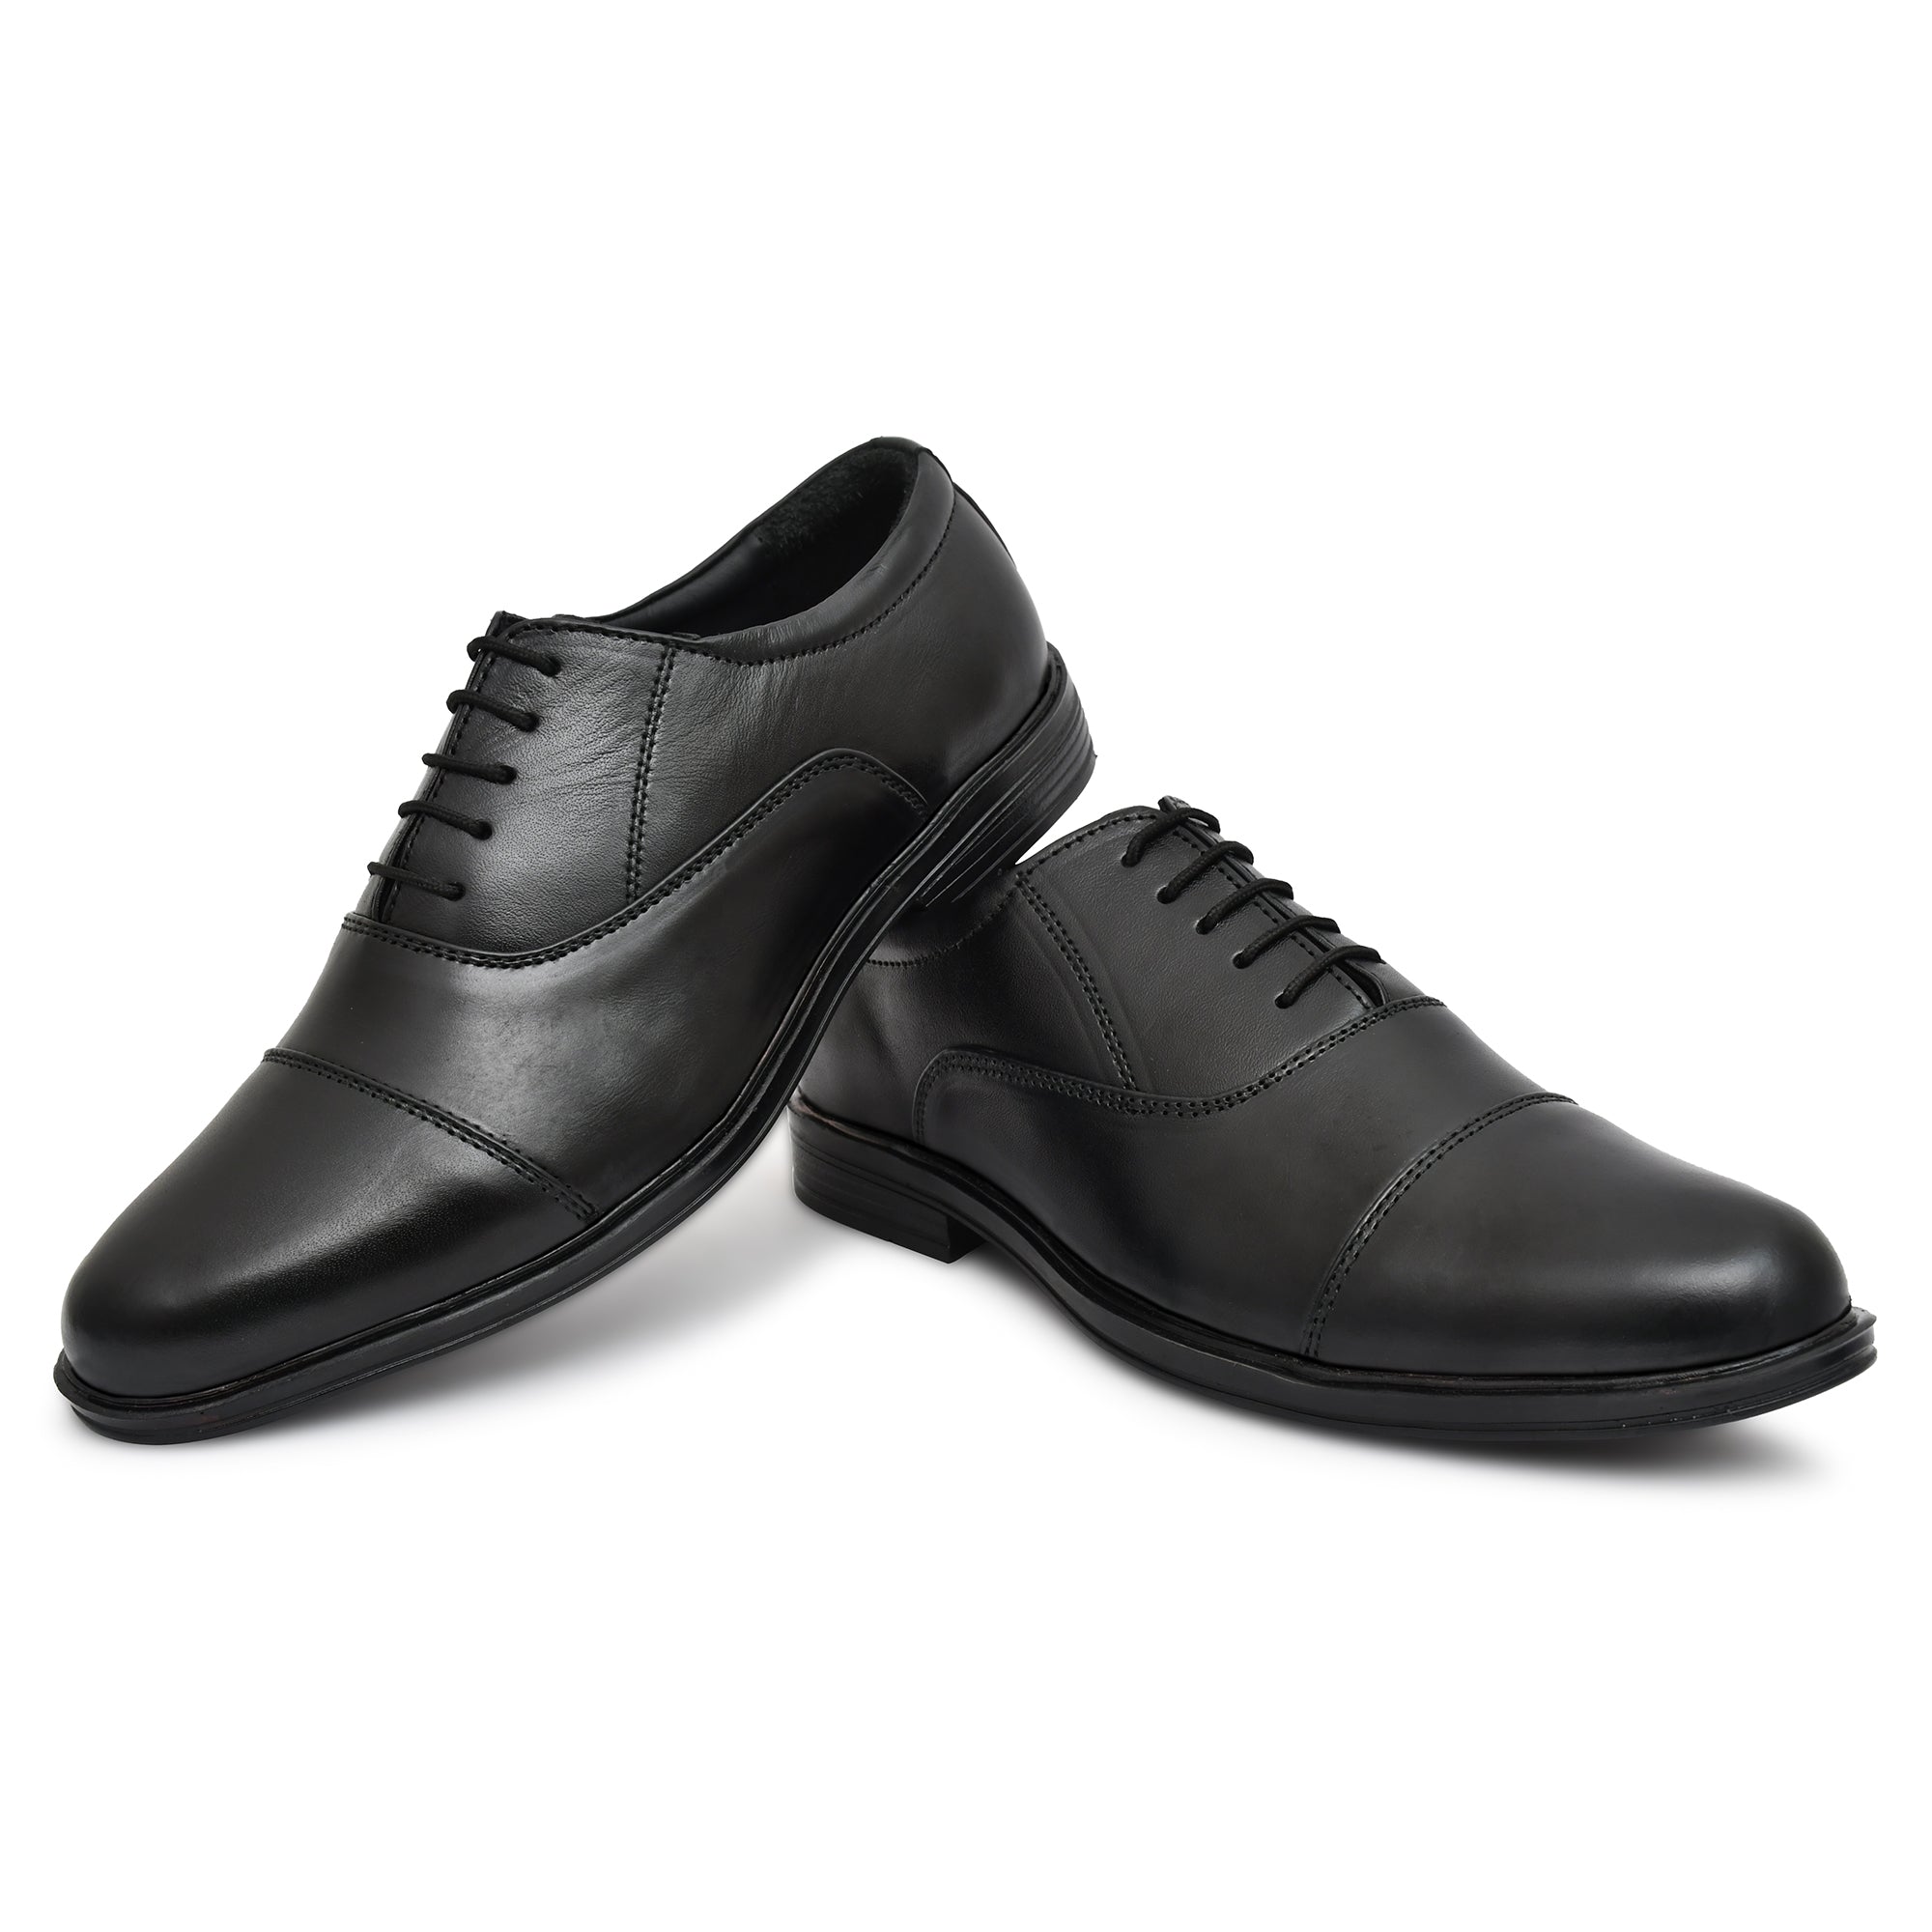 Lace-Up Leather shoes for men's